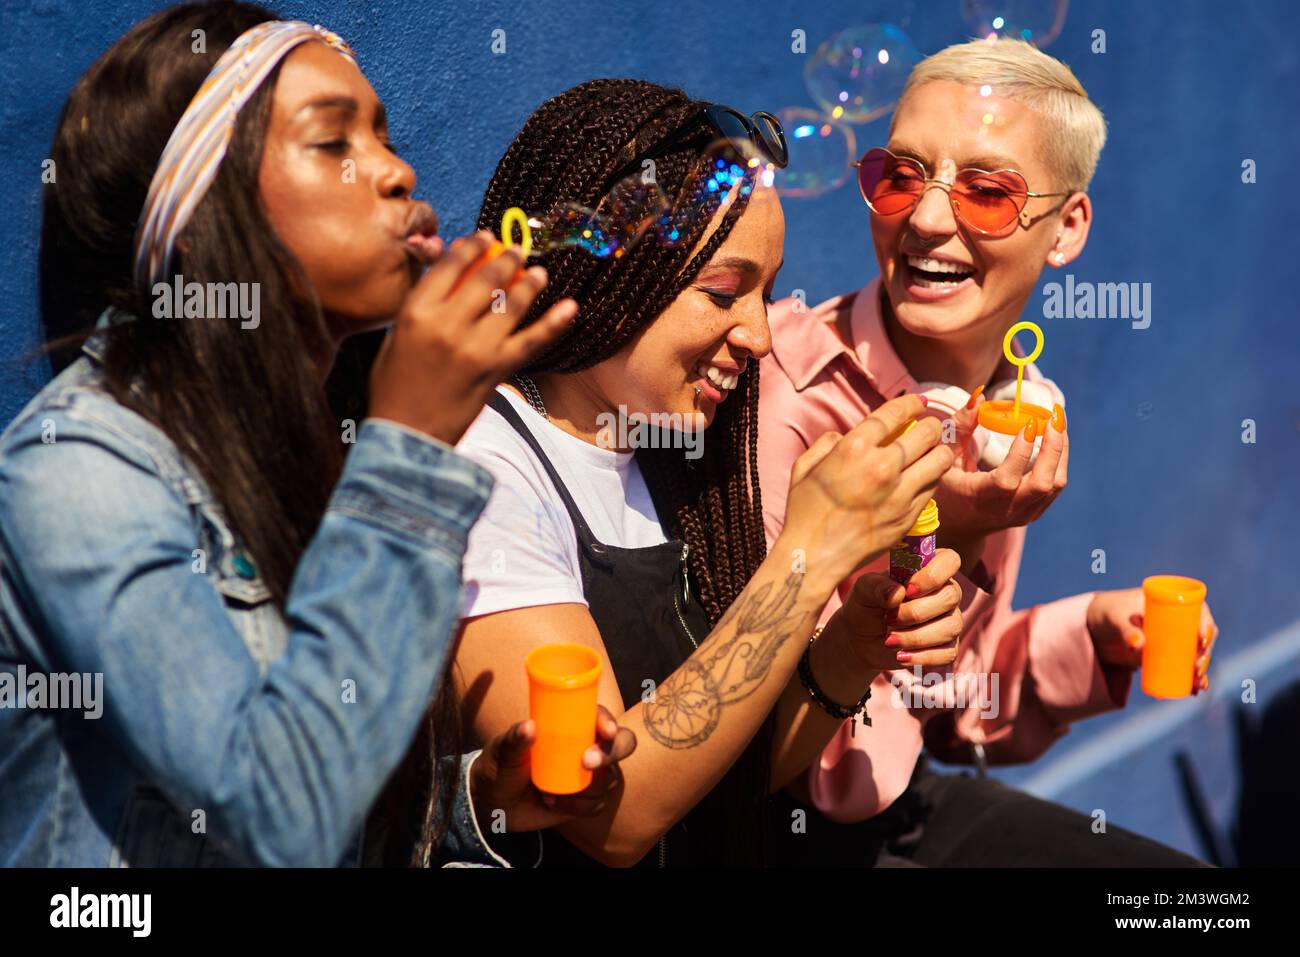 Youre never too old to blow bubbles. three attractive young women sitting against a blue wall together and bonding by blowing bubbles. Stock Photo